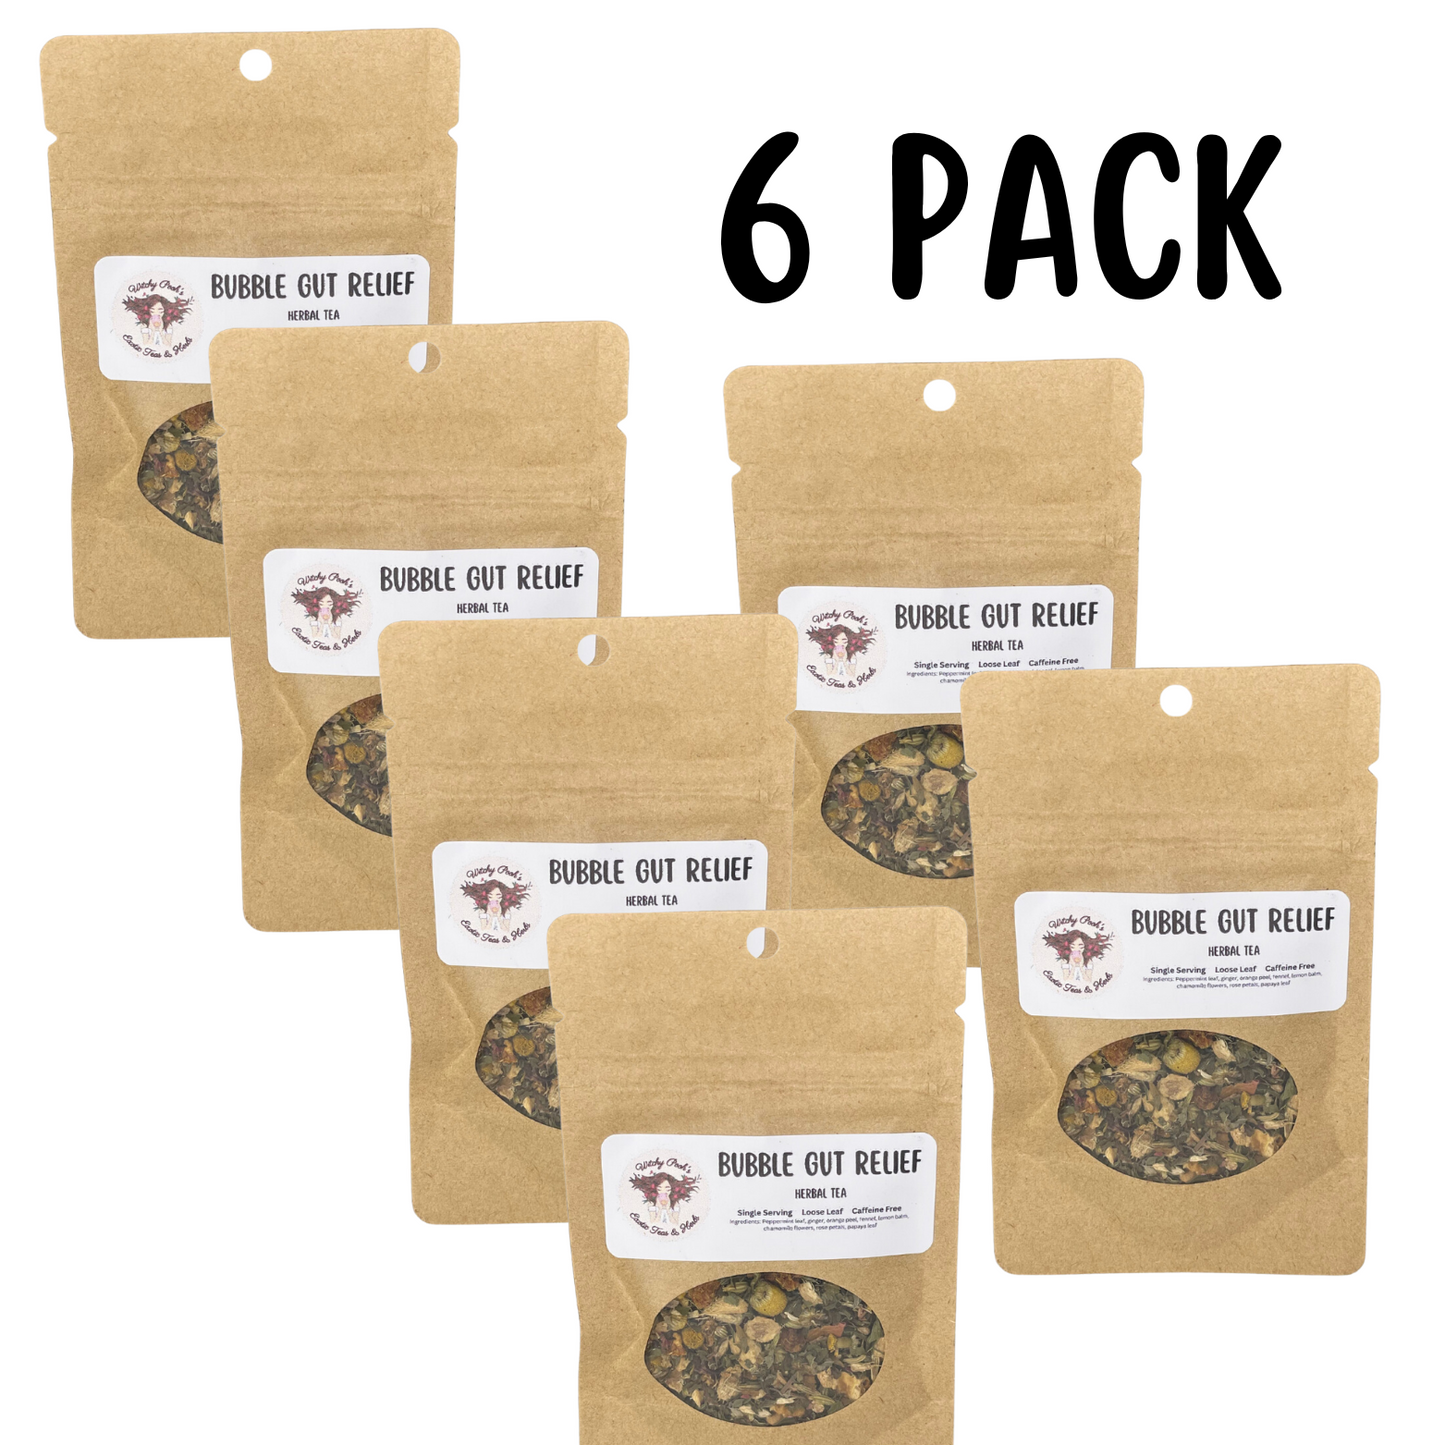 Witchy Pooh's Bubble Gut Relief Loose Leaf Herbal Functional Tea, Caffeine Free, For Digestive Issues-14